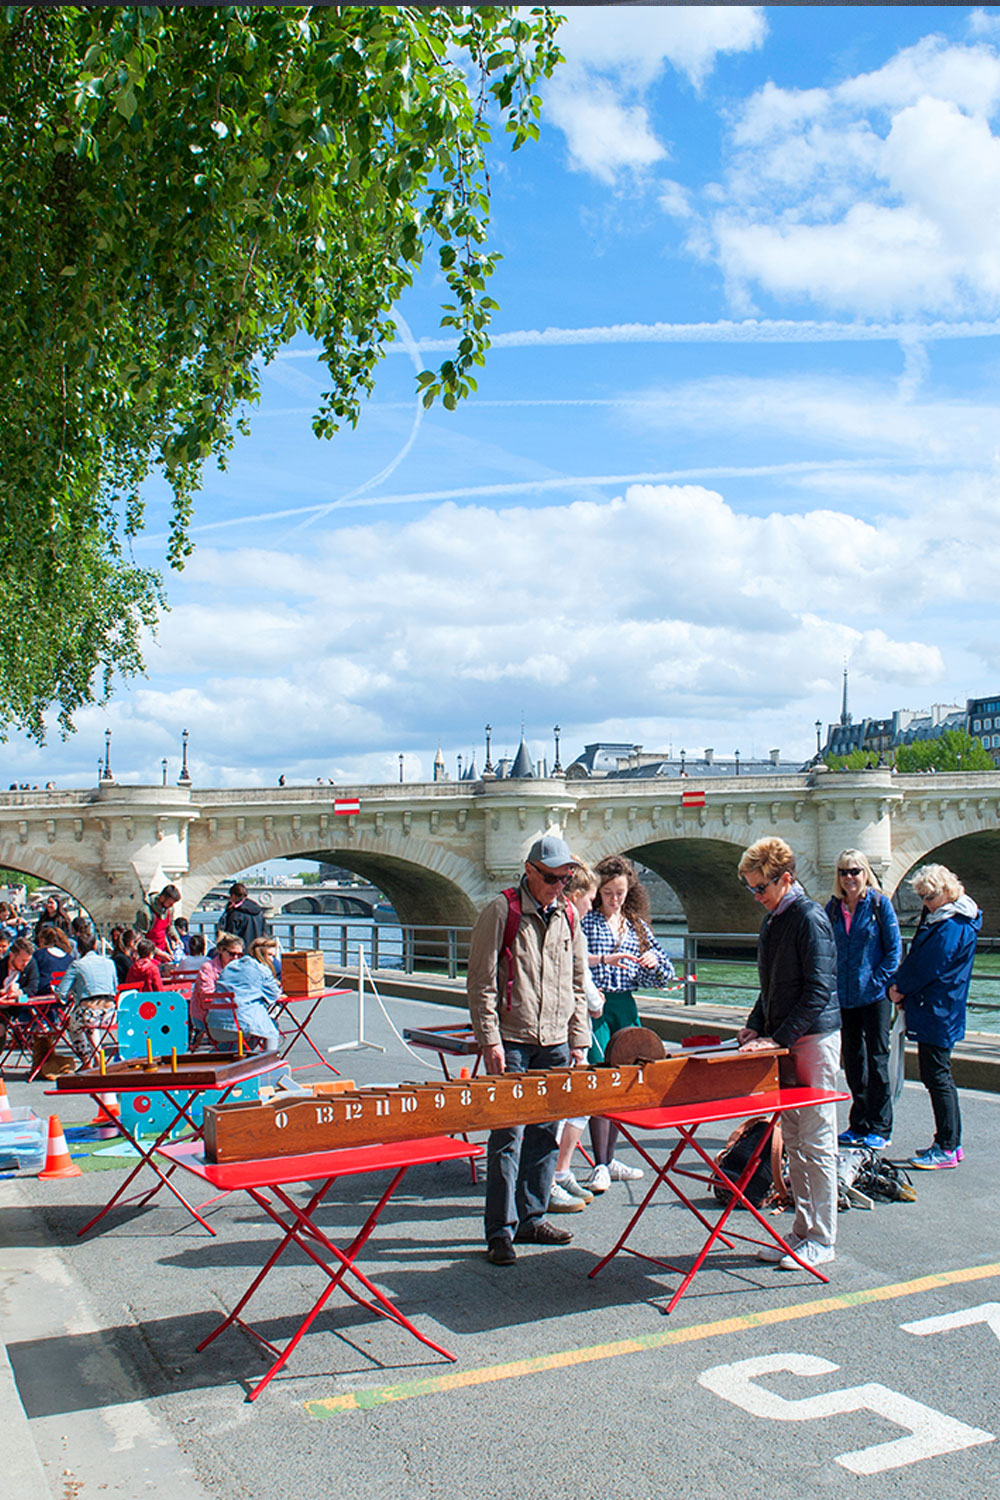 People meeting for play games on the quay along the Seine River in Paris